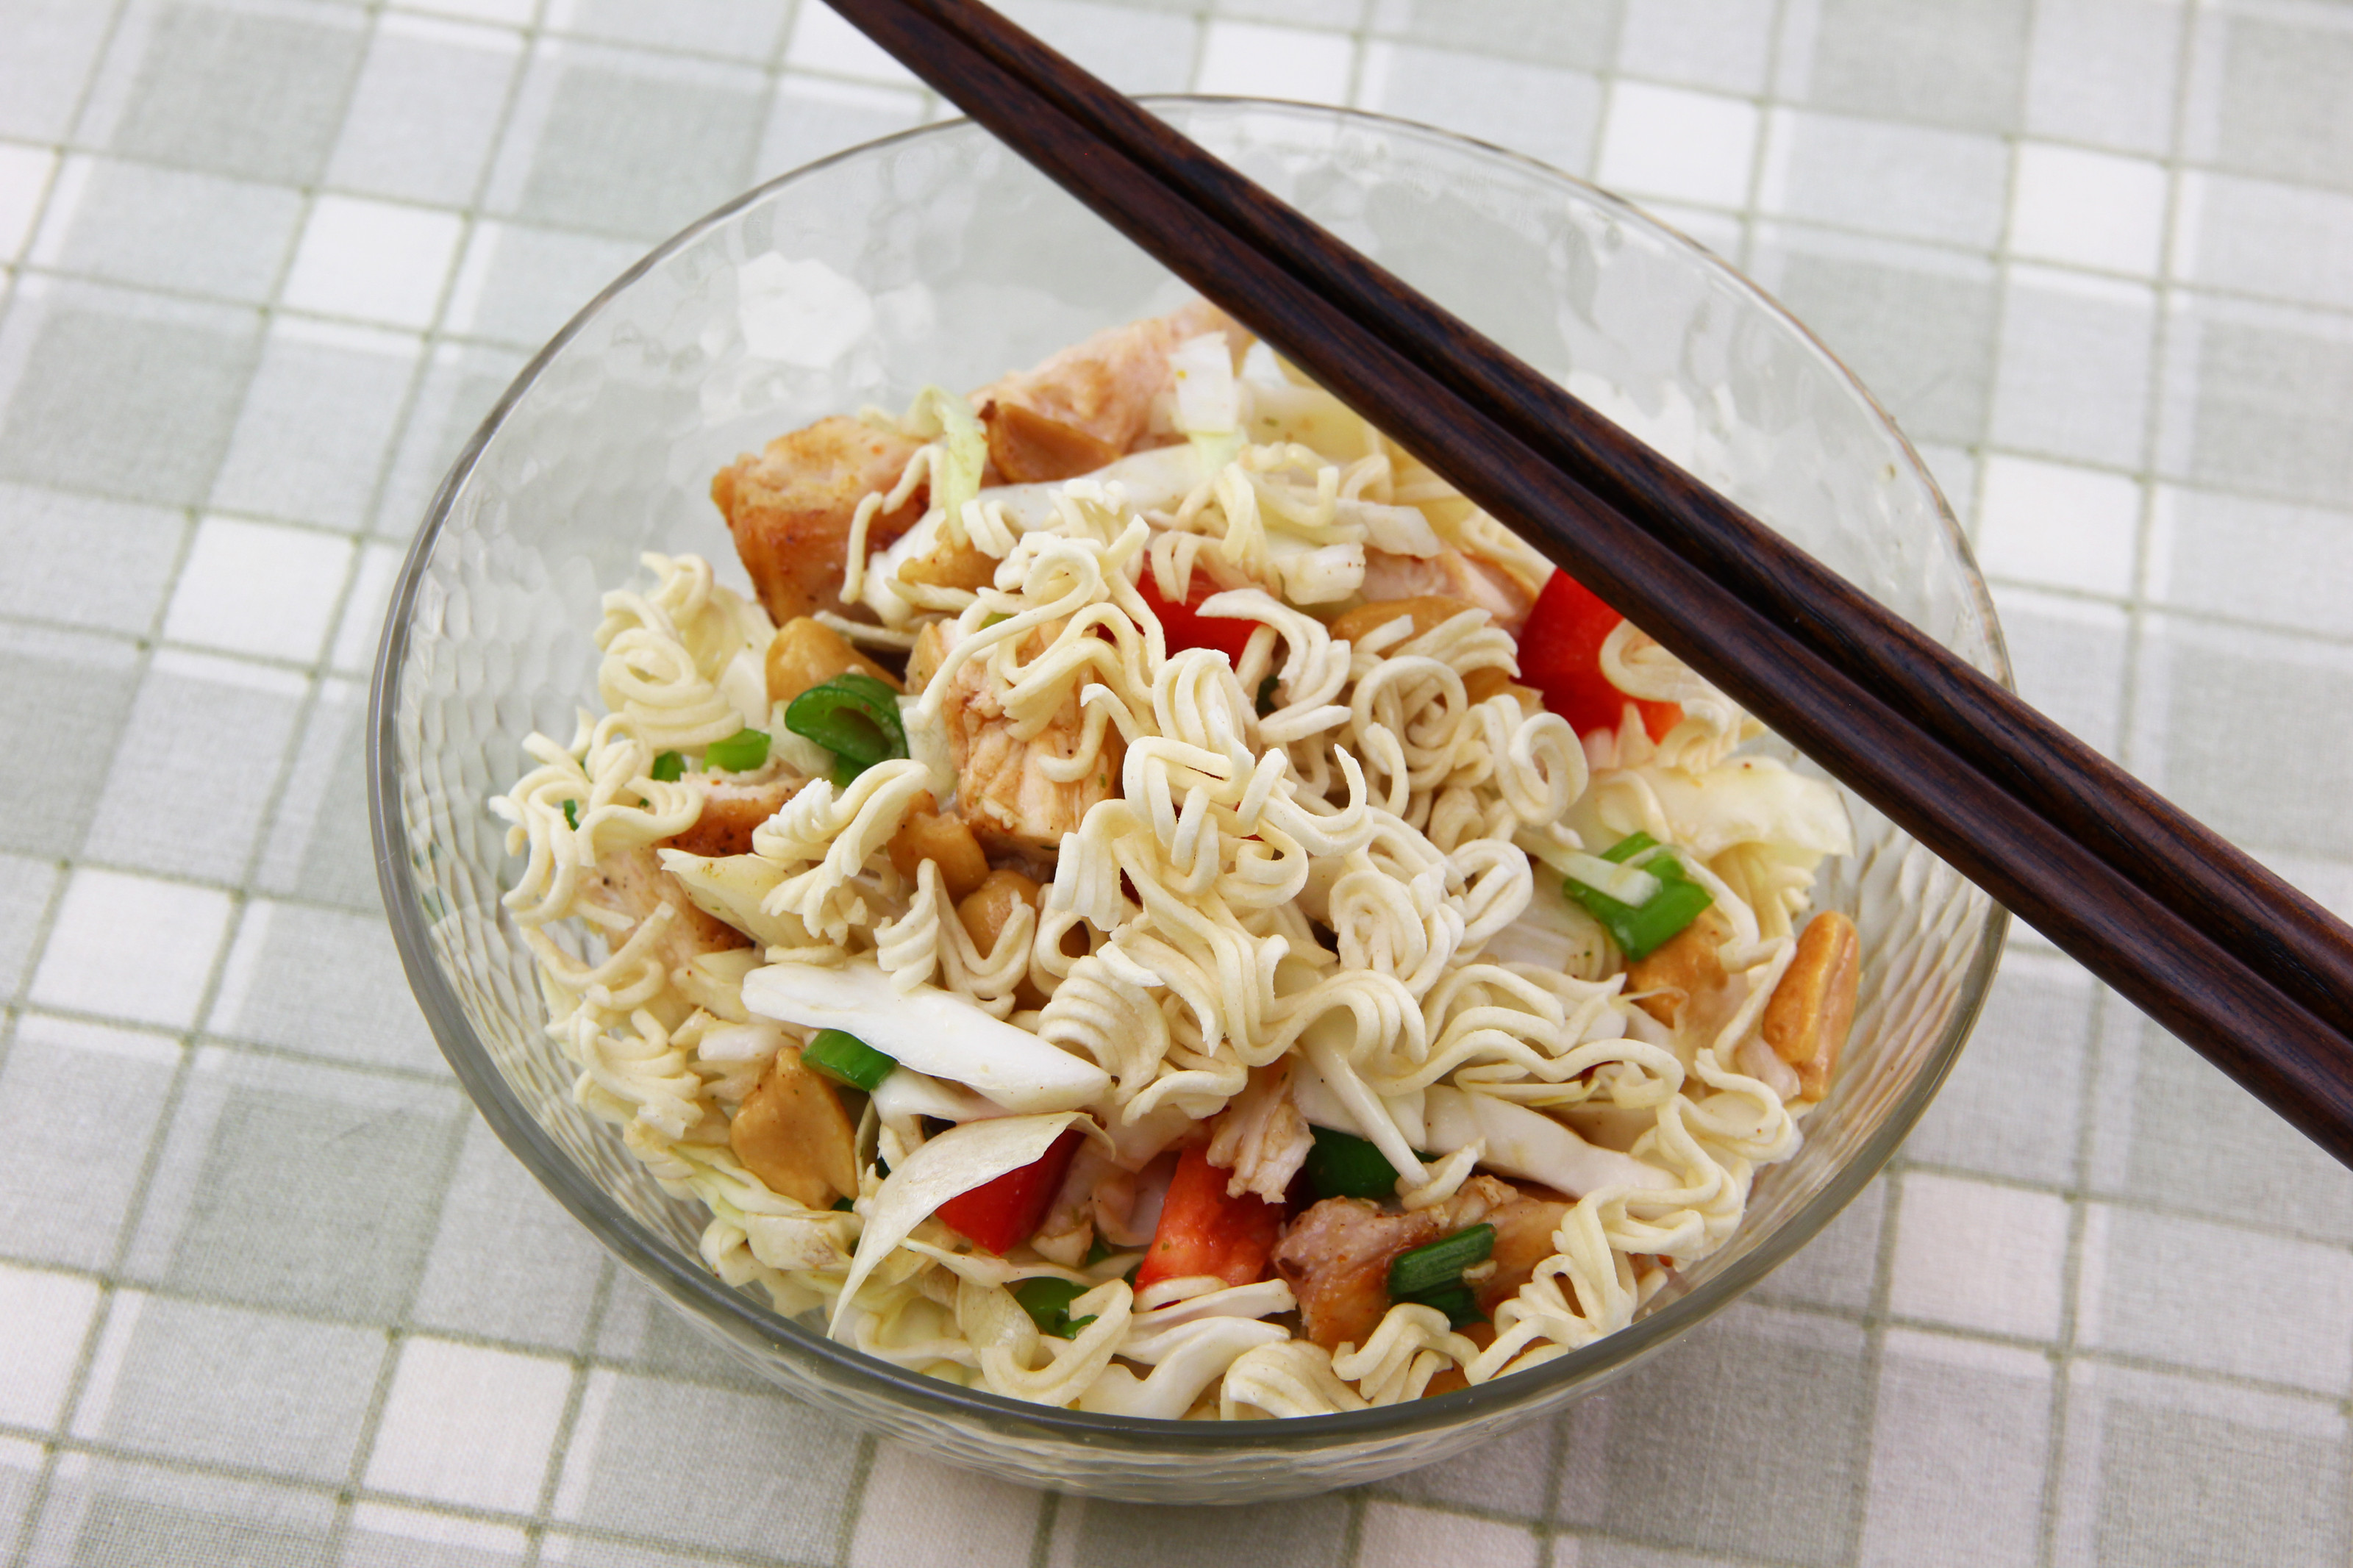 Chinese Chicken Salad Ramen Noodles
 How to Make Chinese Chicken Salad with Ramen Noodles 9 Steps